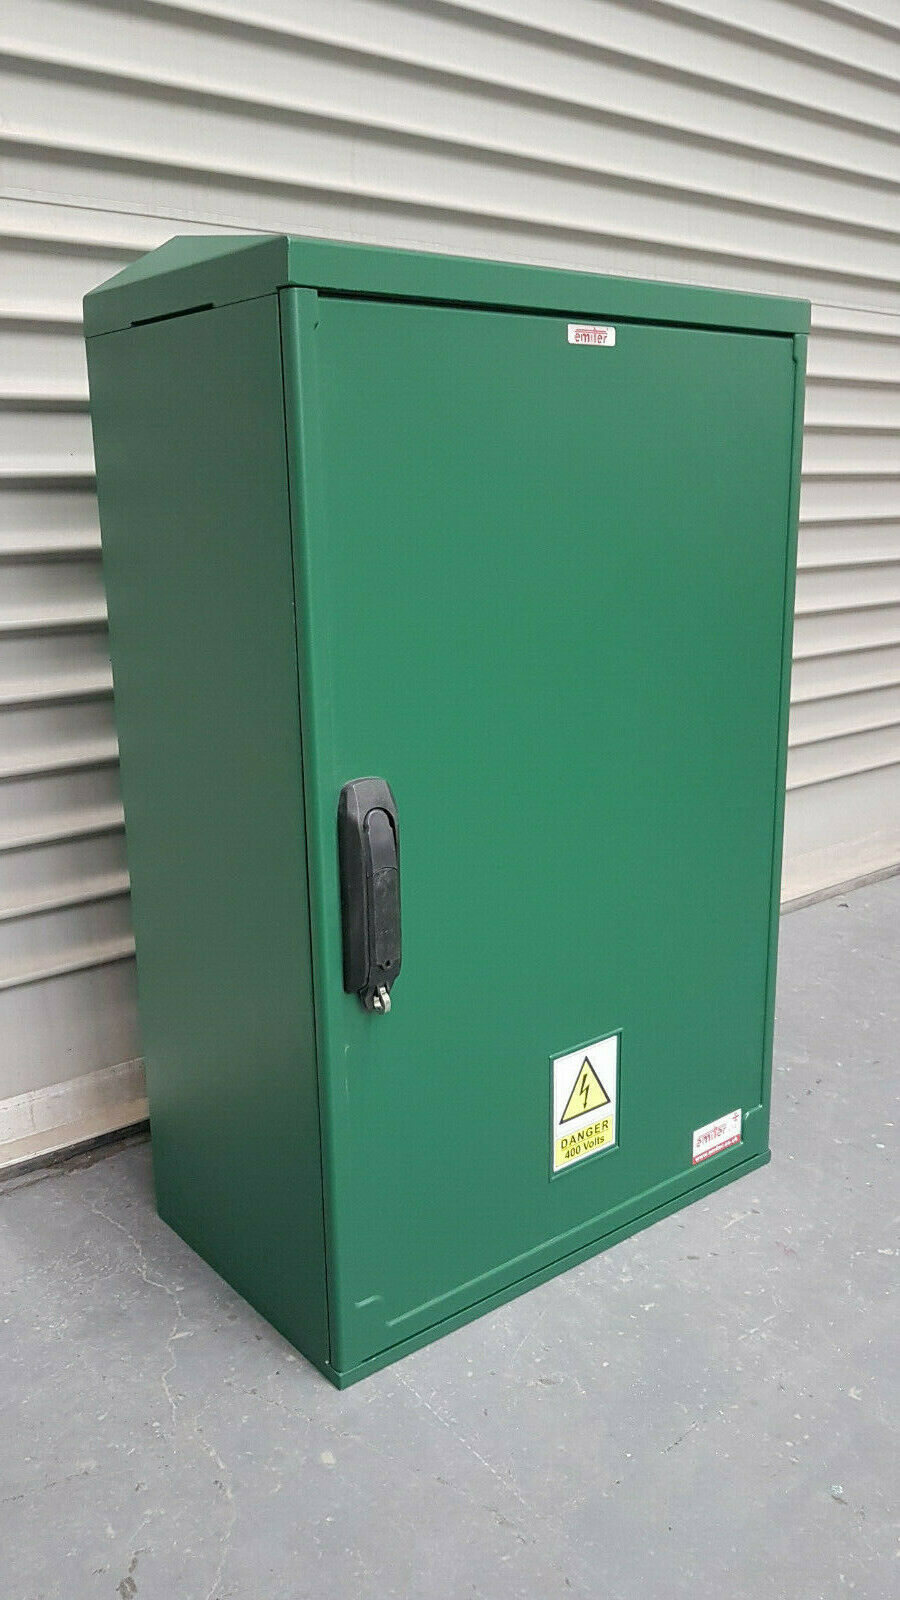 Enclosure H1270xW750xD700mm Housing GRP Electric Kiosk Meter Box Cabinets 